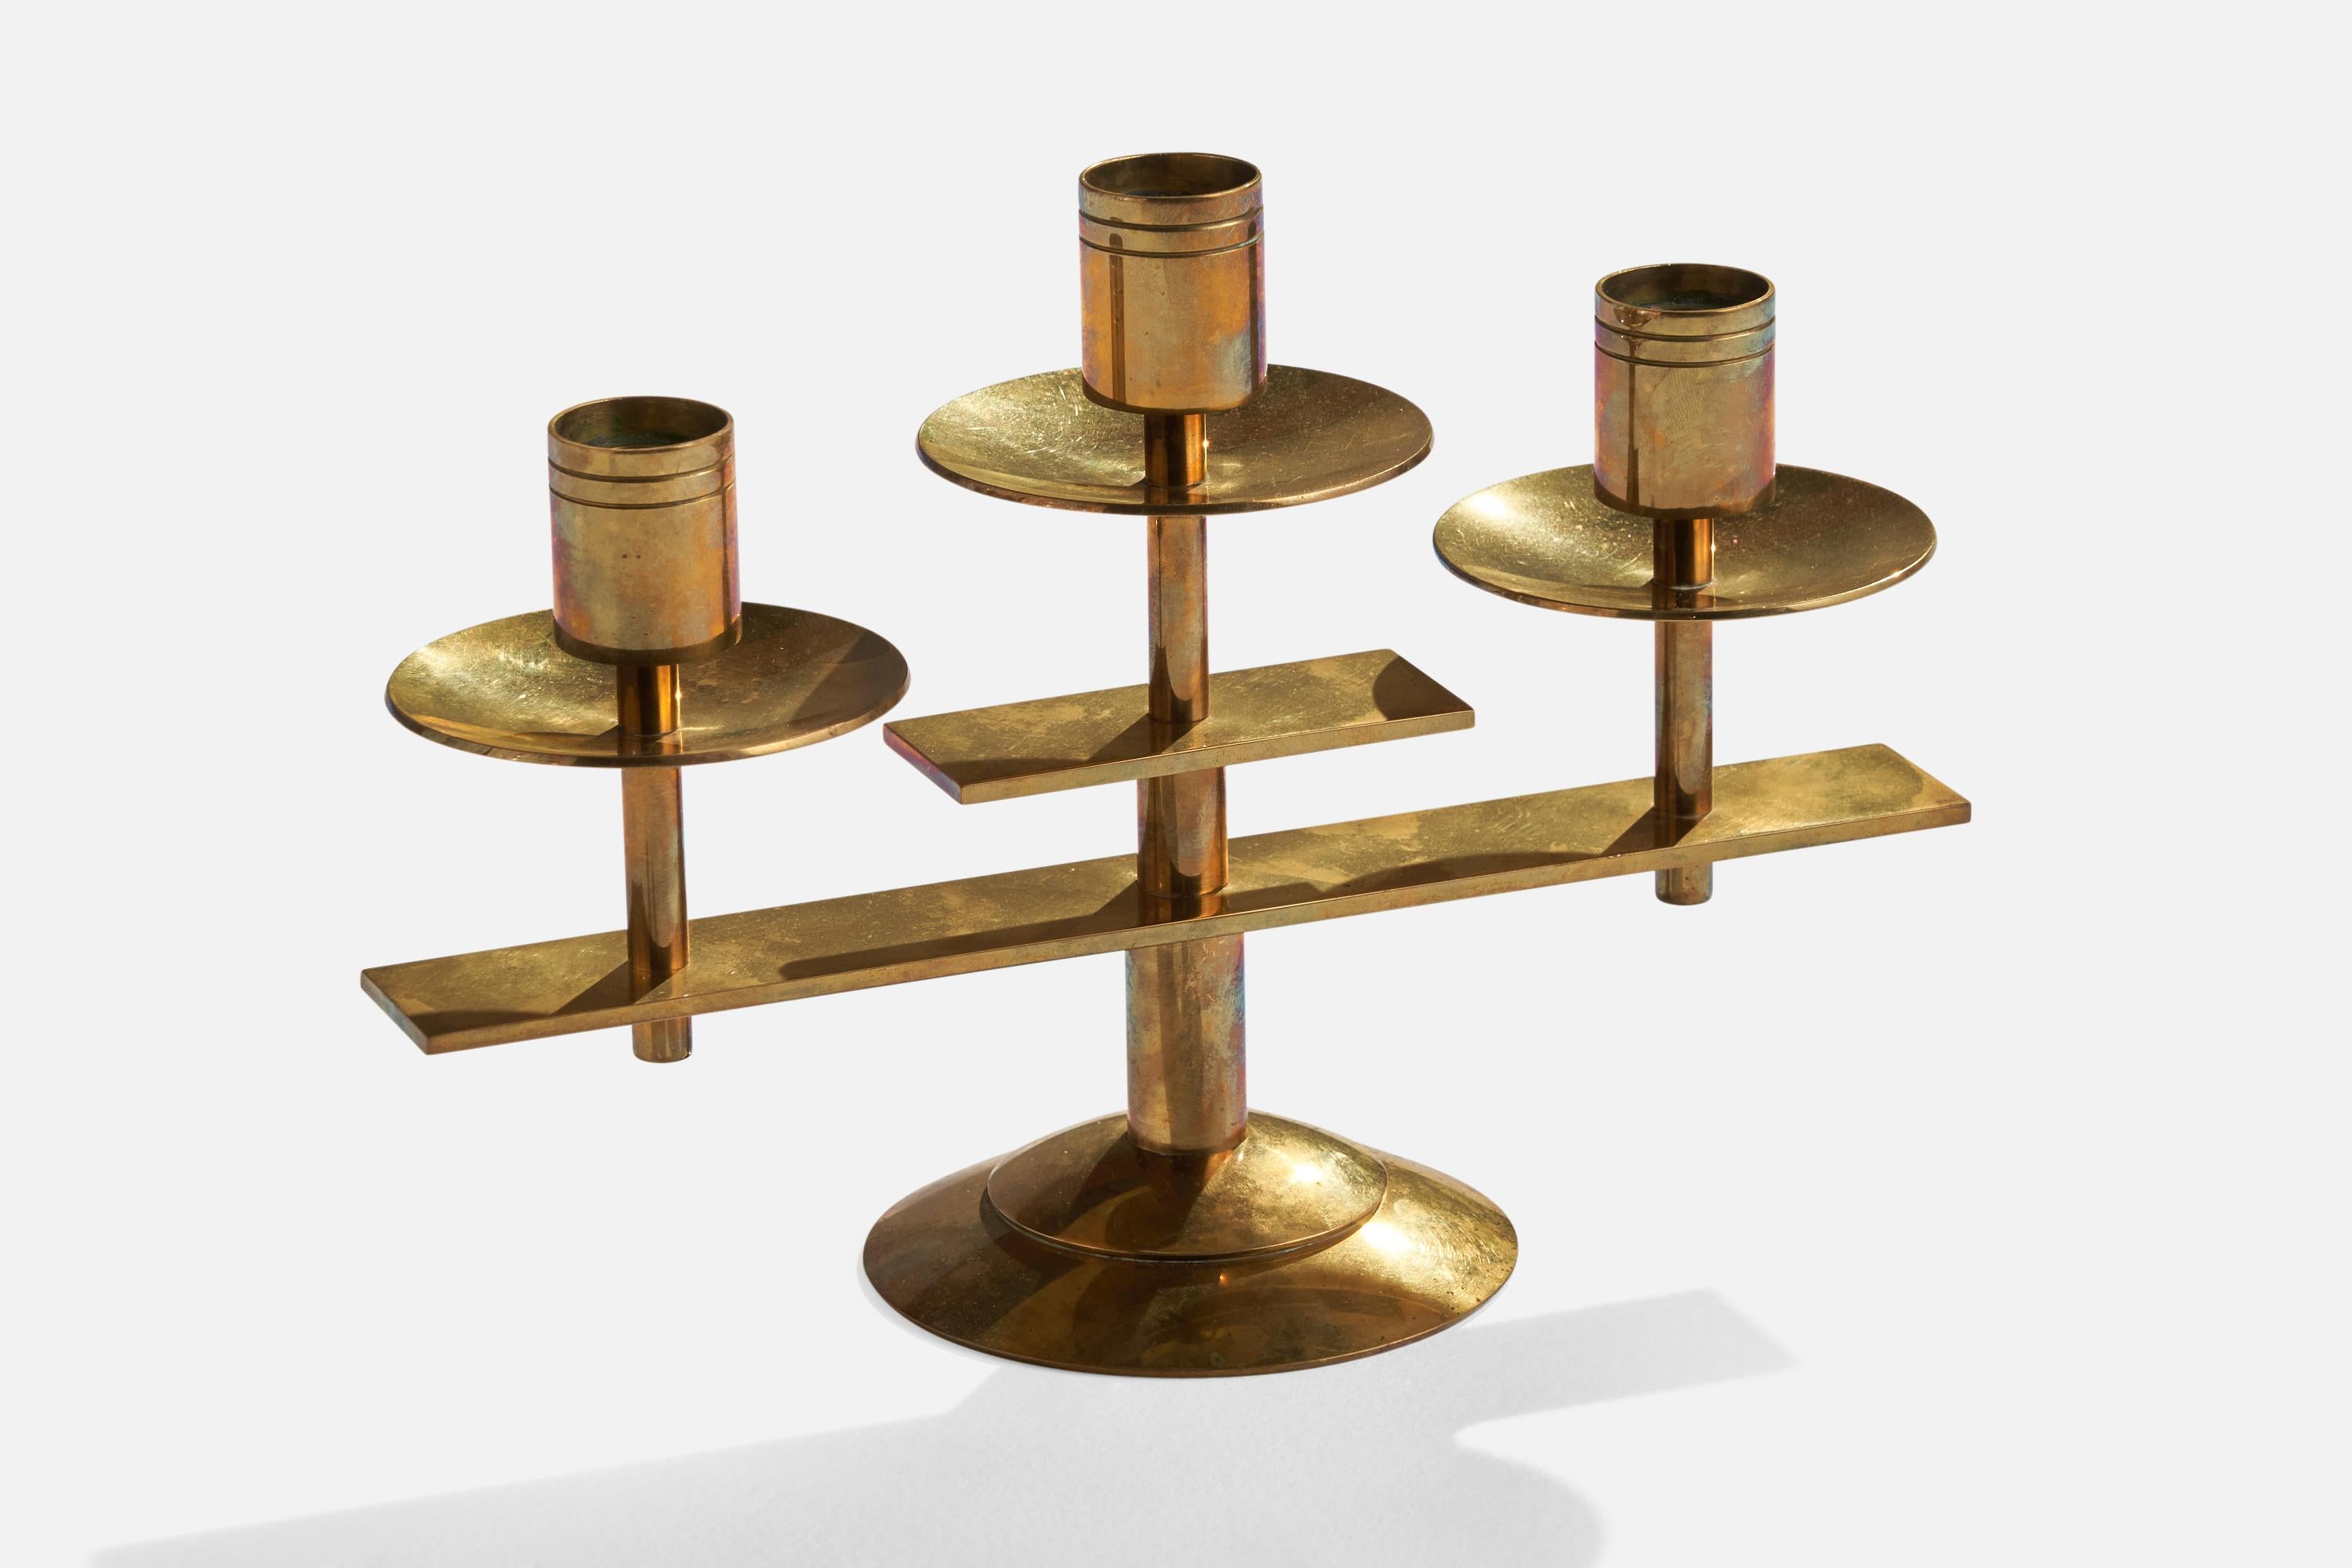 A brass candelabra designed and produced by Småkunst AS, Norway, c. 1950s.

holds .80 candles 